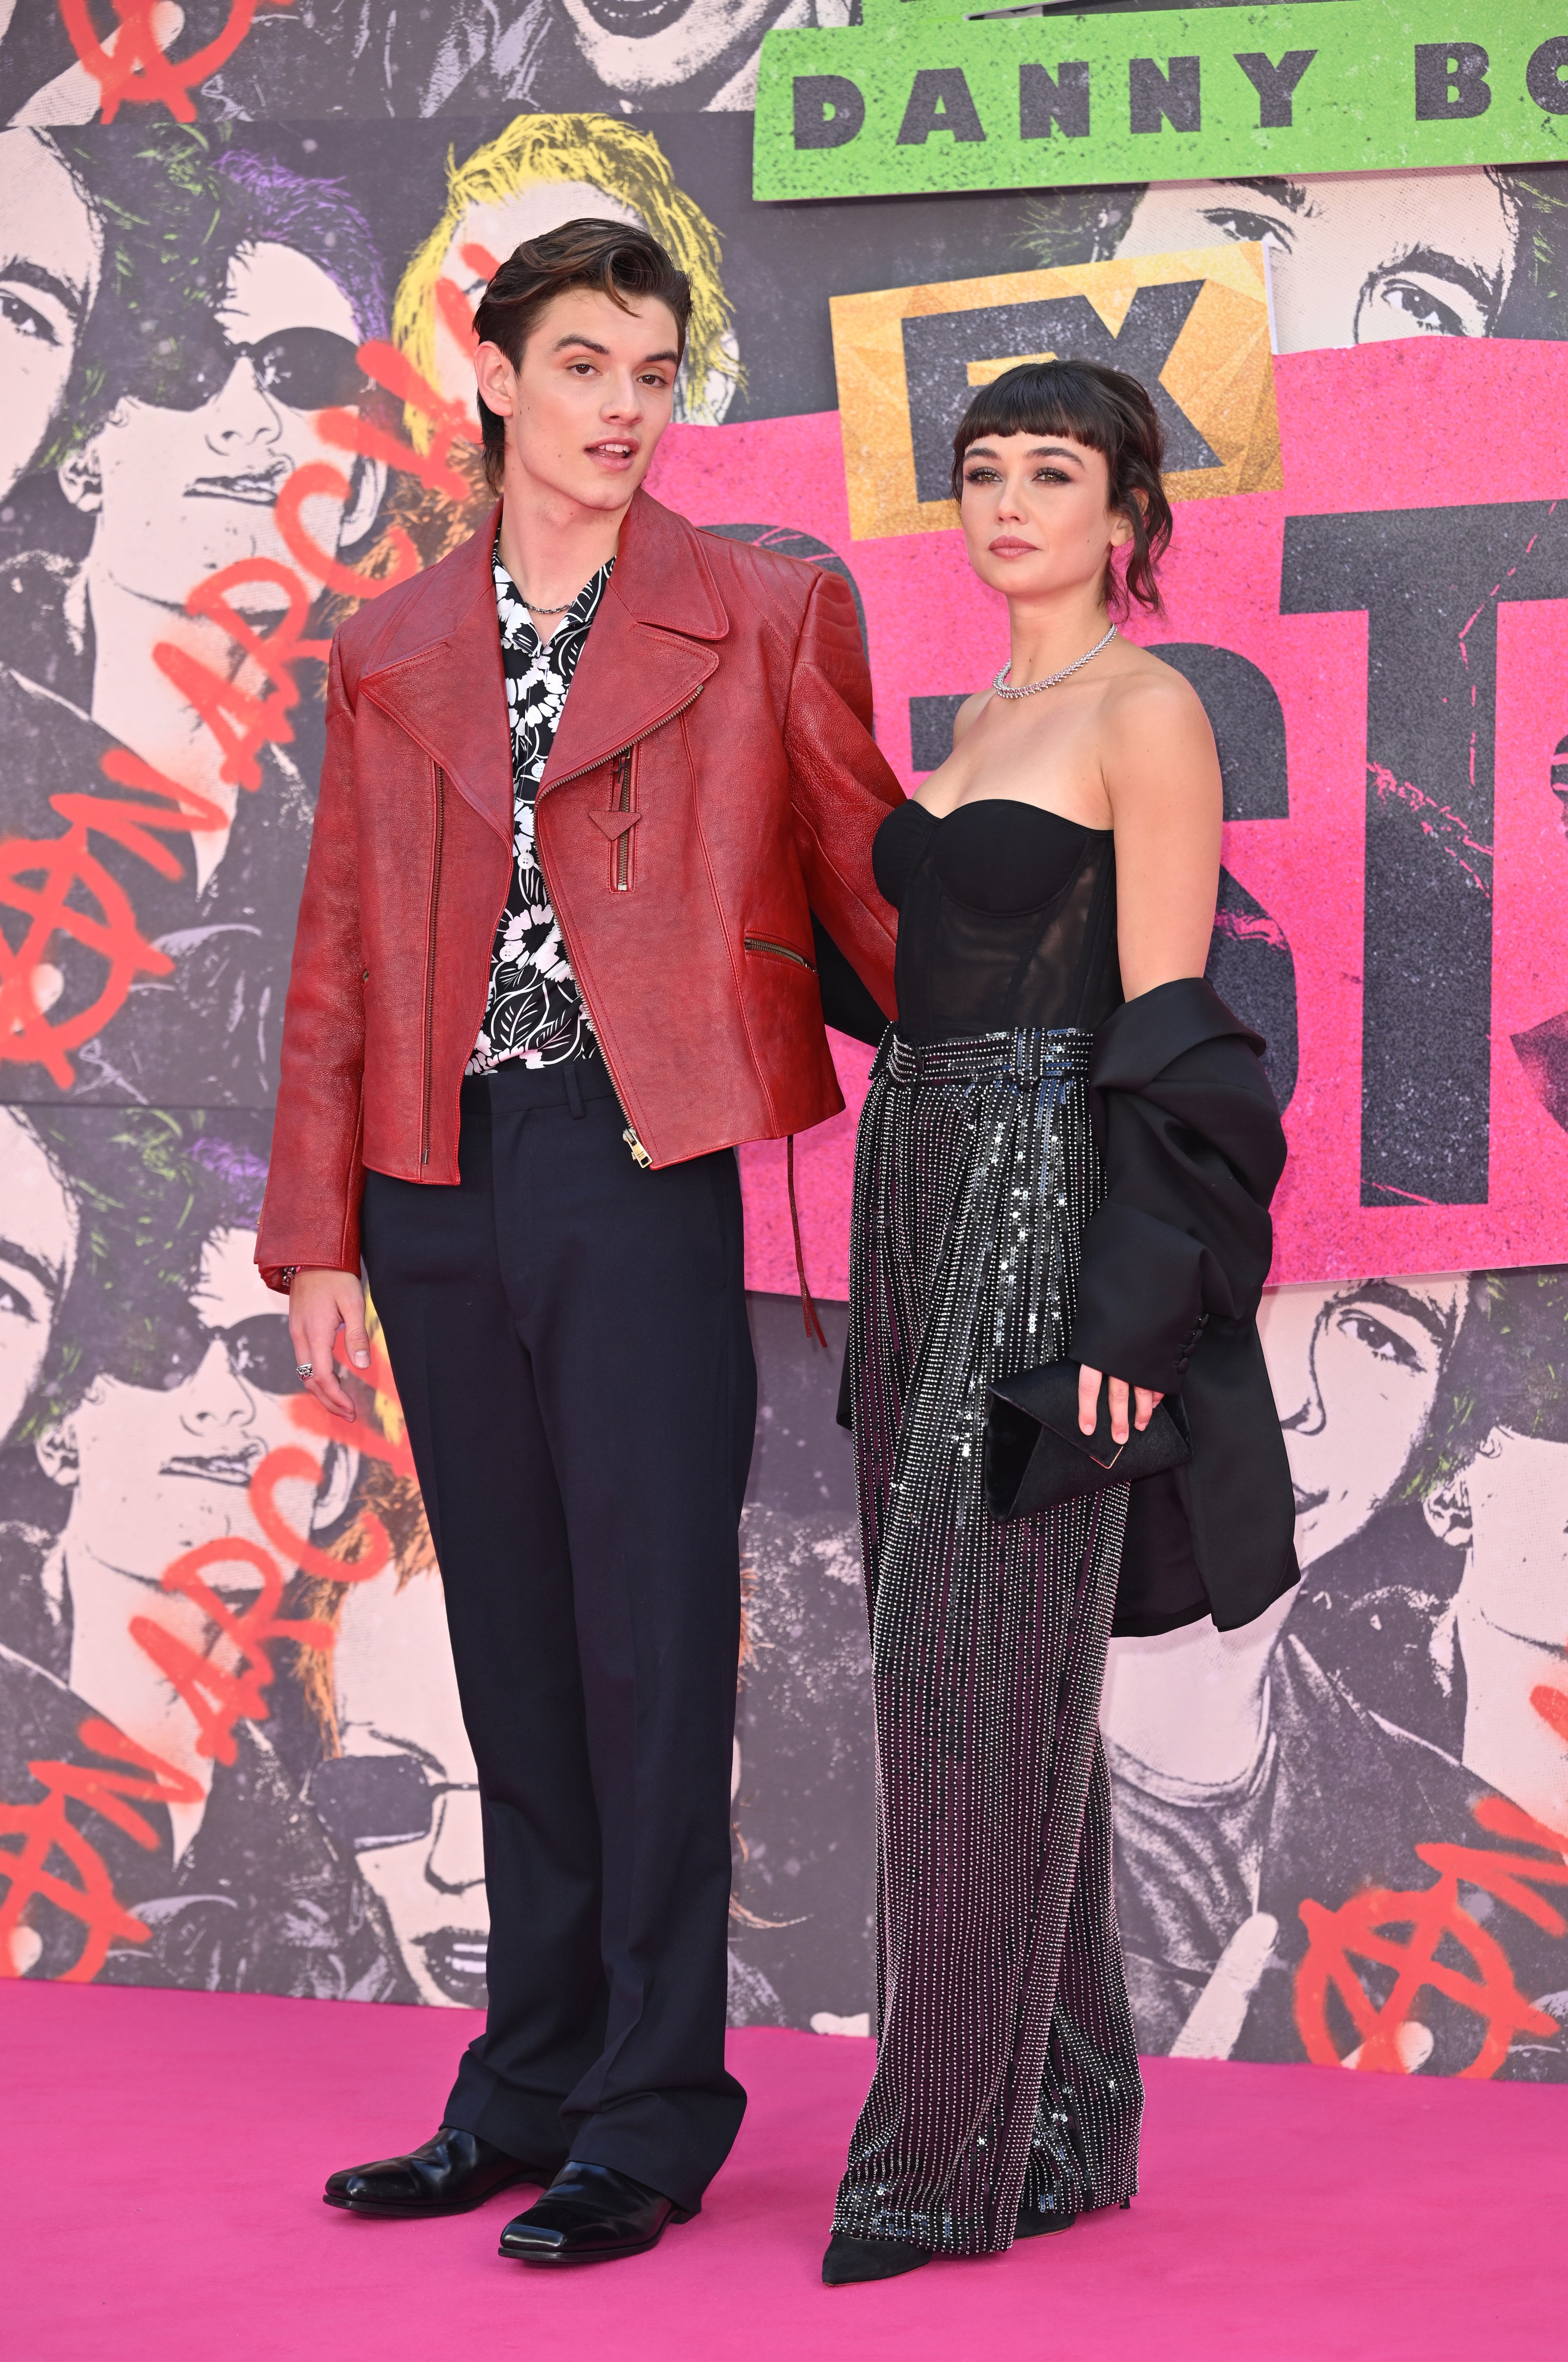 Louis Partridge and Sydney Chandler attend the premiere of the series "Pistol" at Odeon Luxe Leicester Square on May 23, 2022, in London, England.  | Source: Getty Images